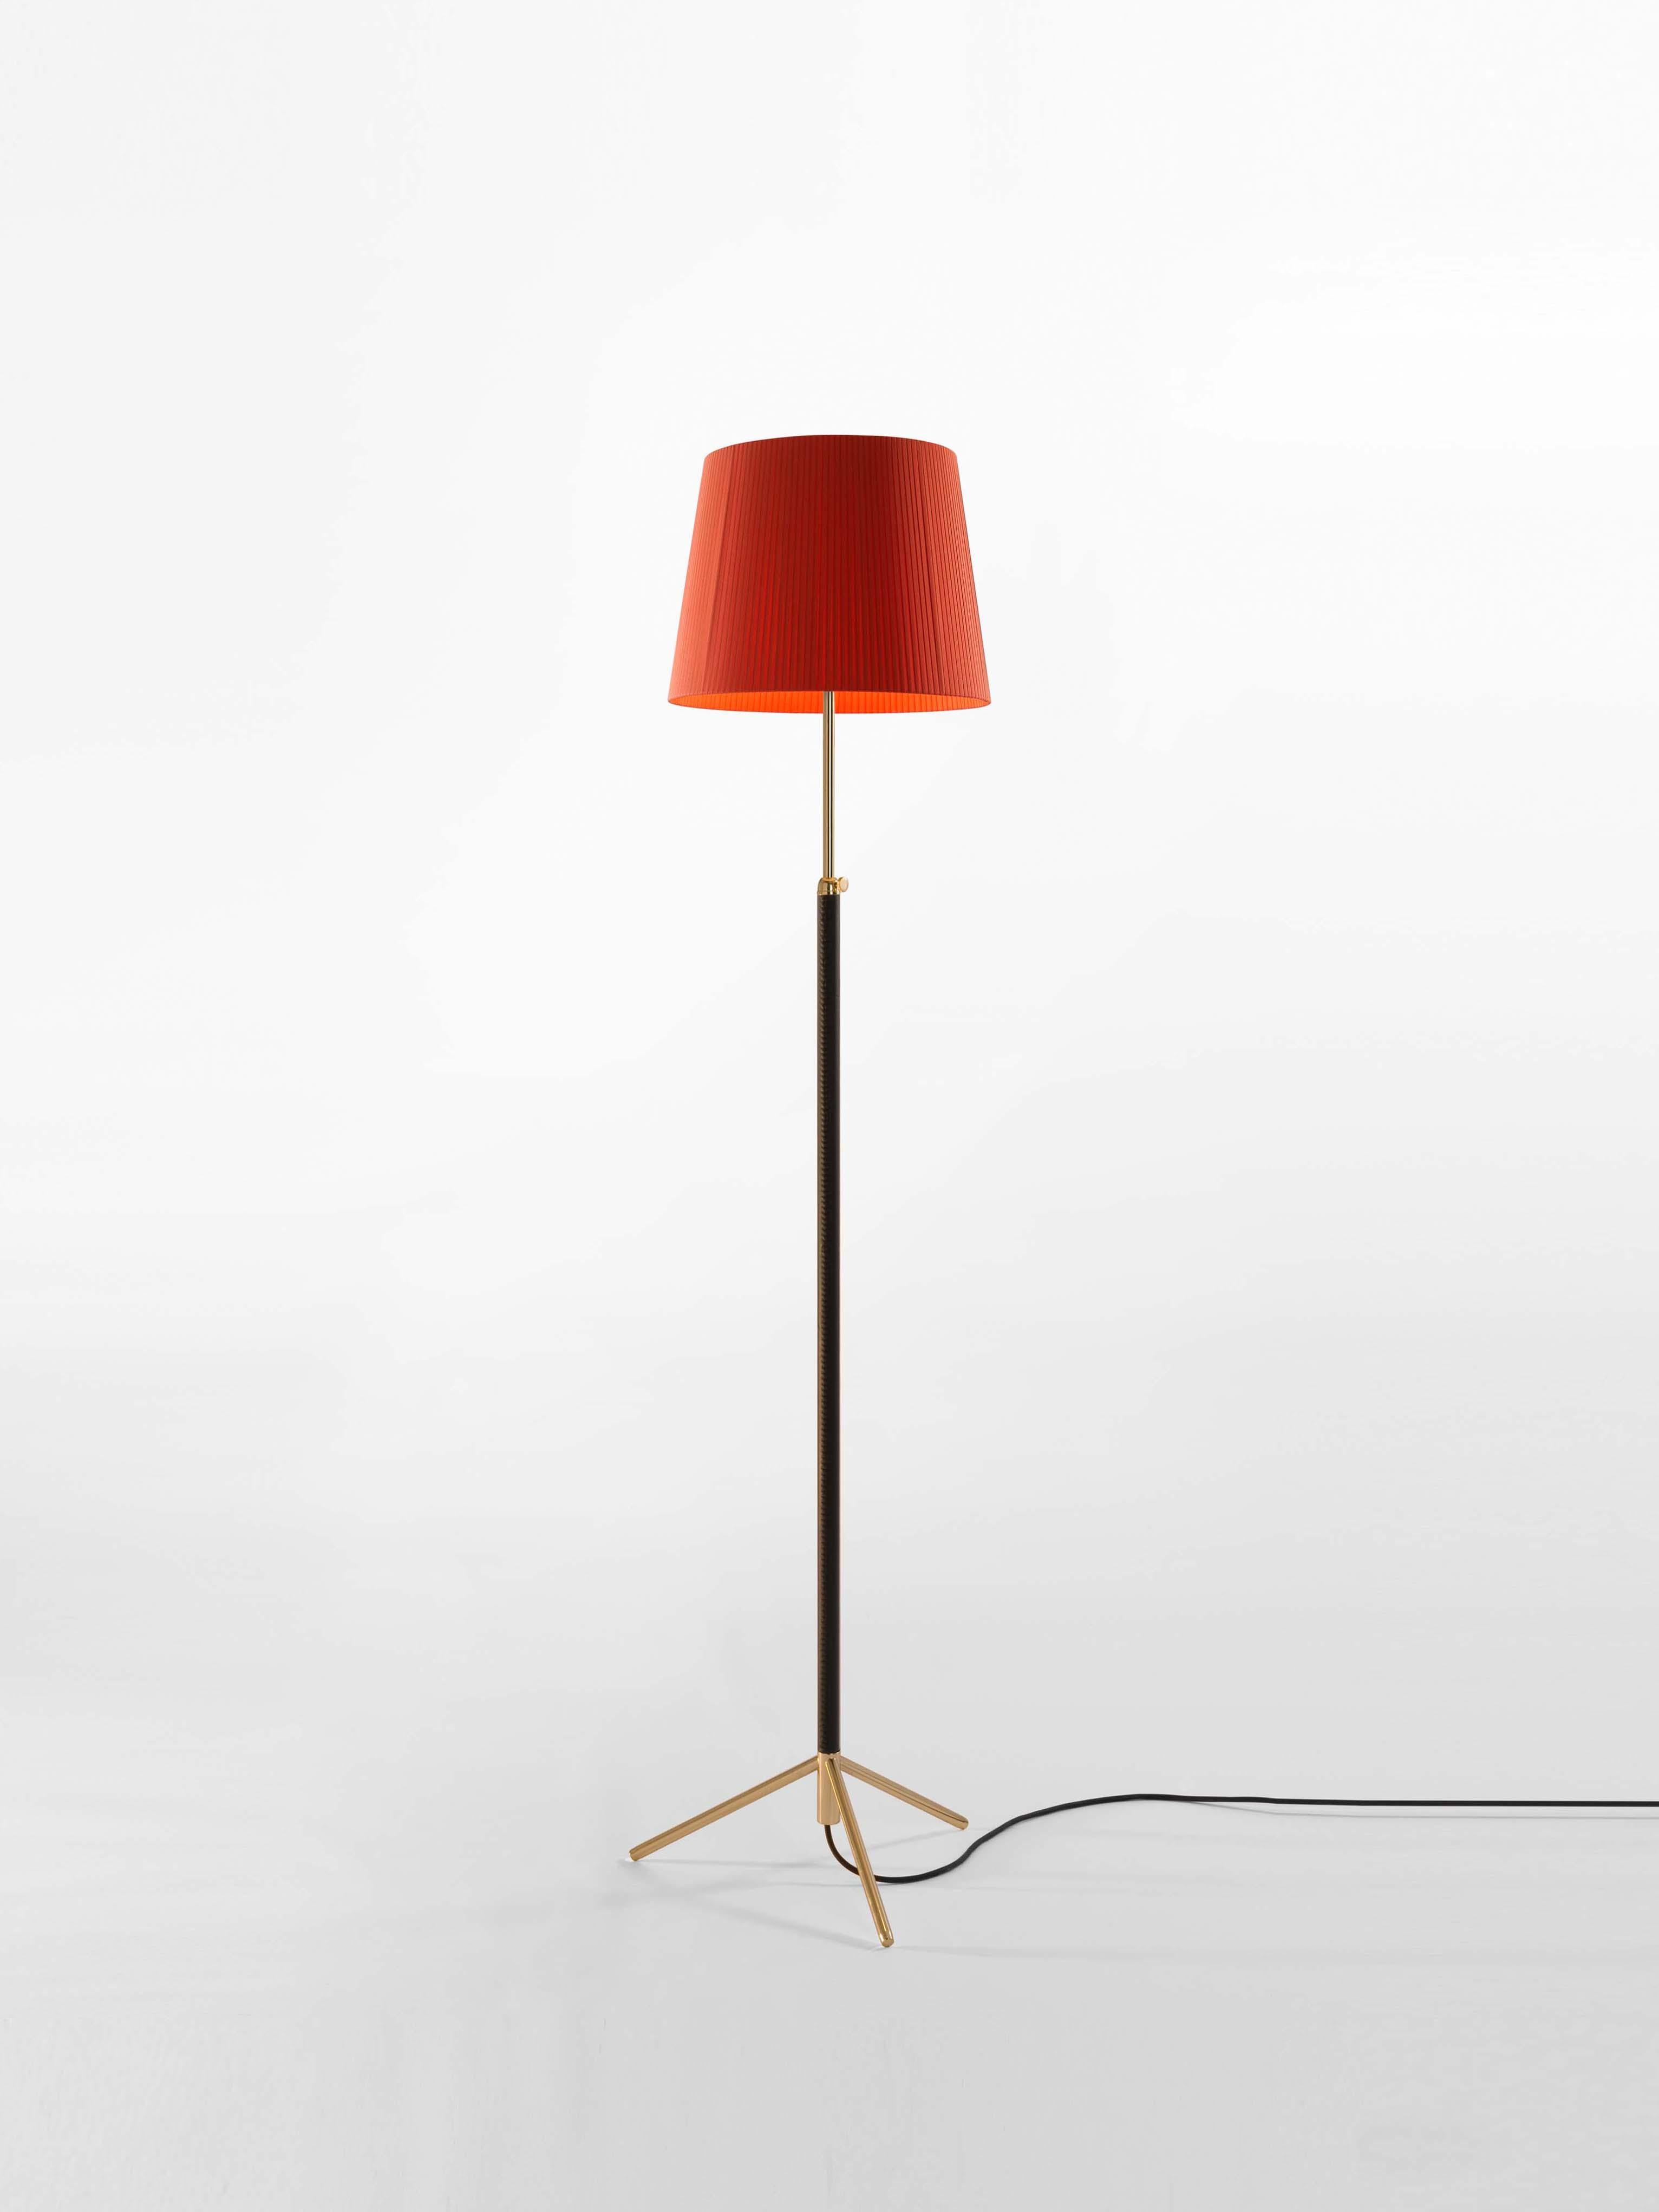 Red and brass Pie de Salón G3 floor lamp by Jaume Sans
Dimensions: D 40 x H 120-160 cm
Materials: Metal, leather, ribbon.
Available in chrome-plated or polished brass structure.
Available in other shade colors and sizes.

This slender